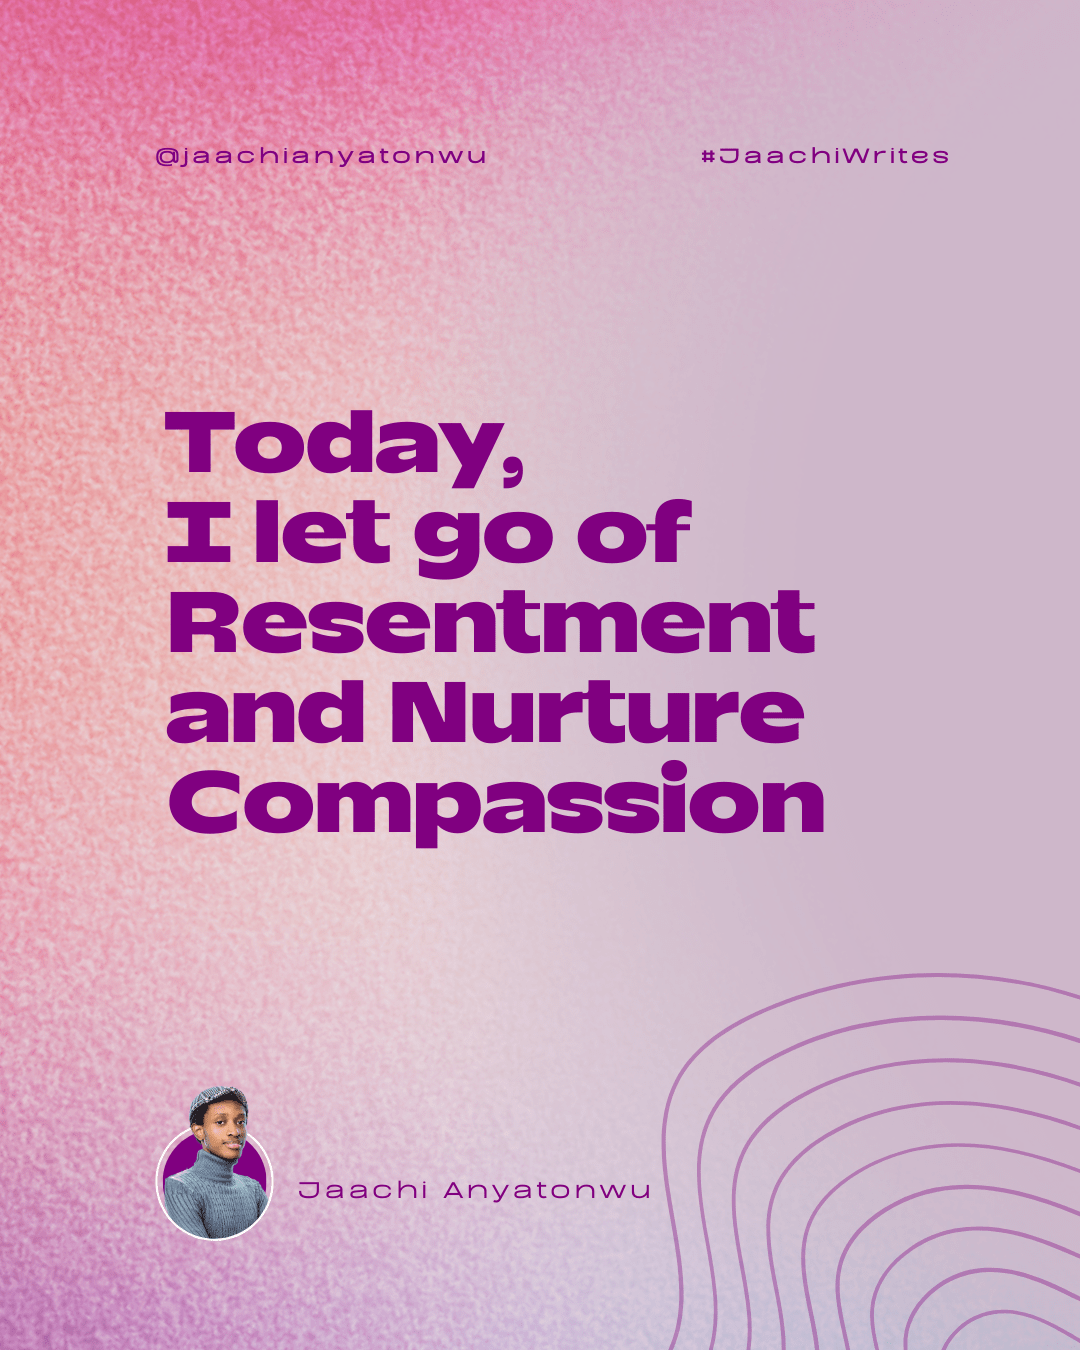 Today, I let go of Resentment and Nurture Compassion